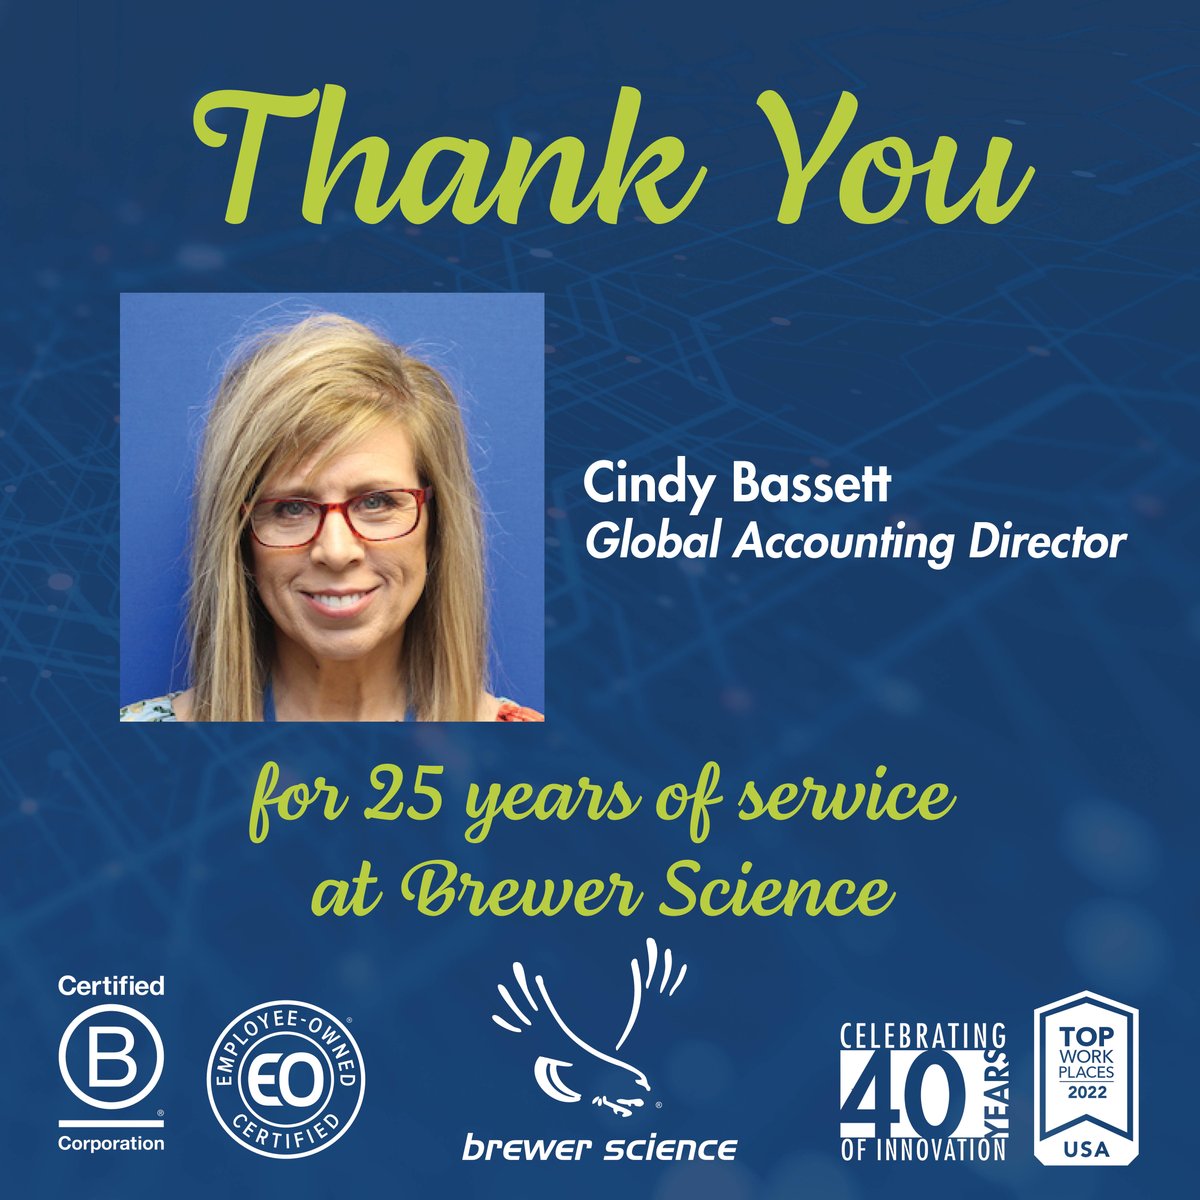 test Twitter Media - Happy Anniversary to our #EmployeeOwner Cindy Bassett! Please join us in congratulating Cindy on 25 years of service at Brewer Science! Thank you for being so dedicated to our company mission. Explore careers at Brewer Science: https://t.co/23VimSN9w3
.
.
.
@CertifiedEO https://t.co/Gx19qYW77n